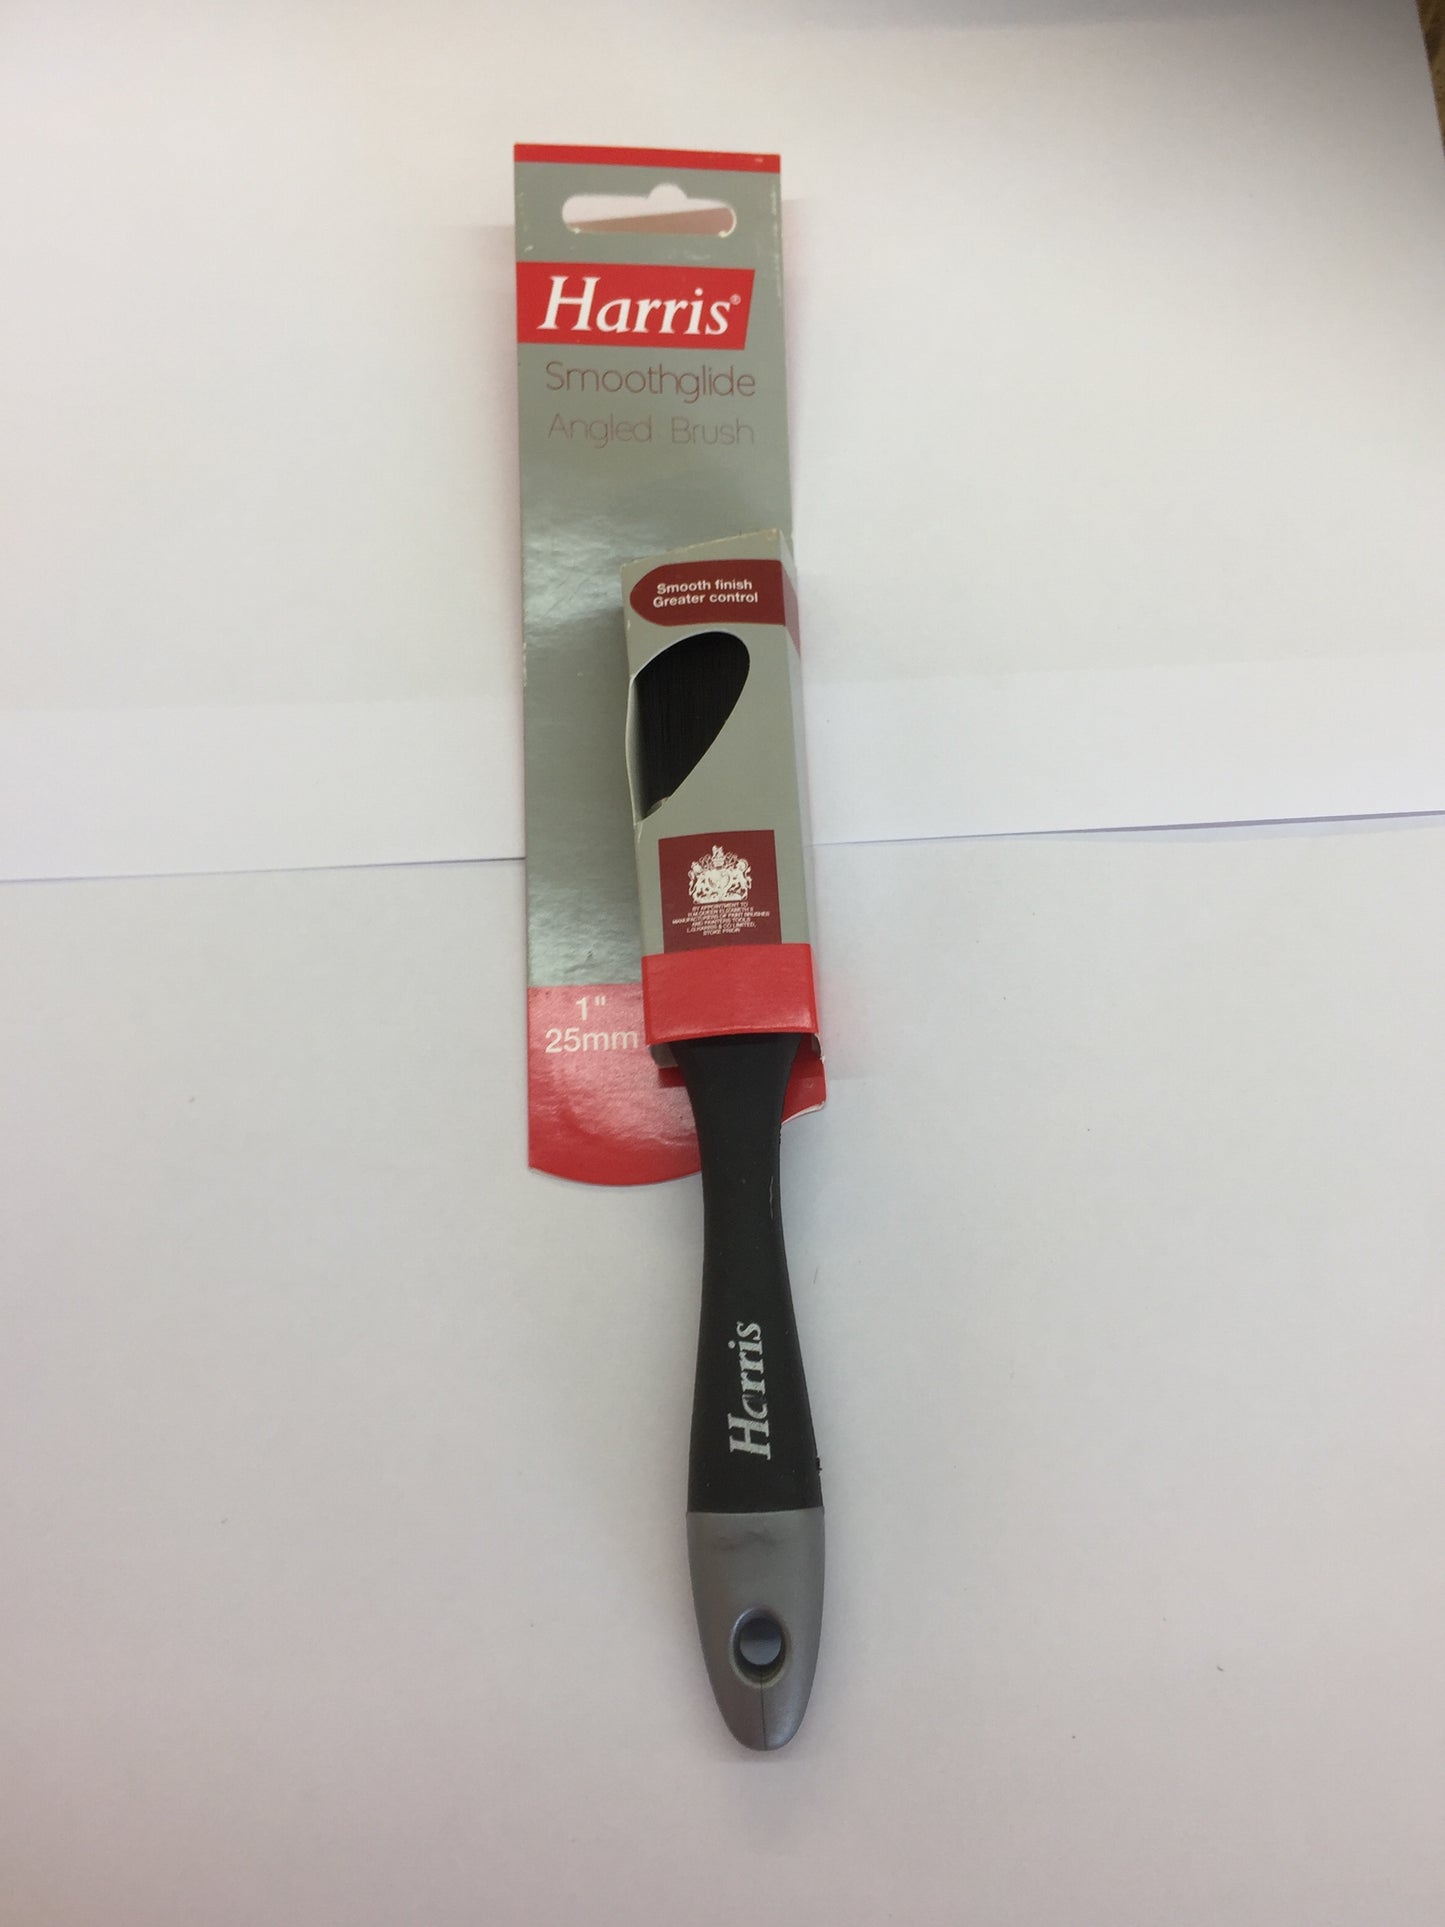 Harris Smoothglide Angled 1" Paint Brush